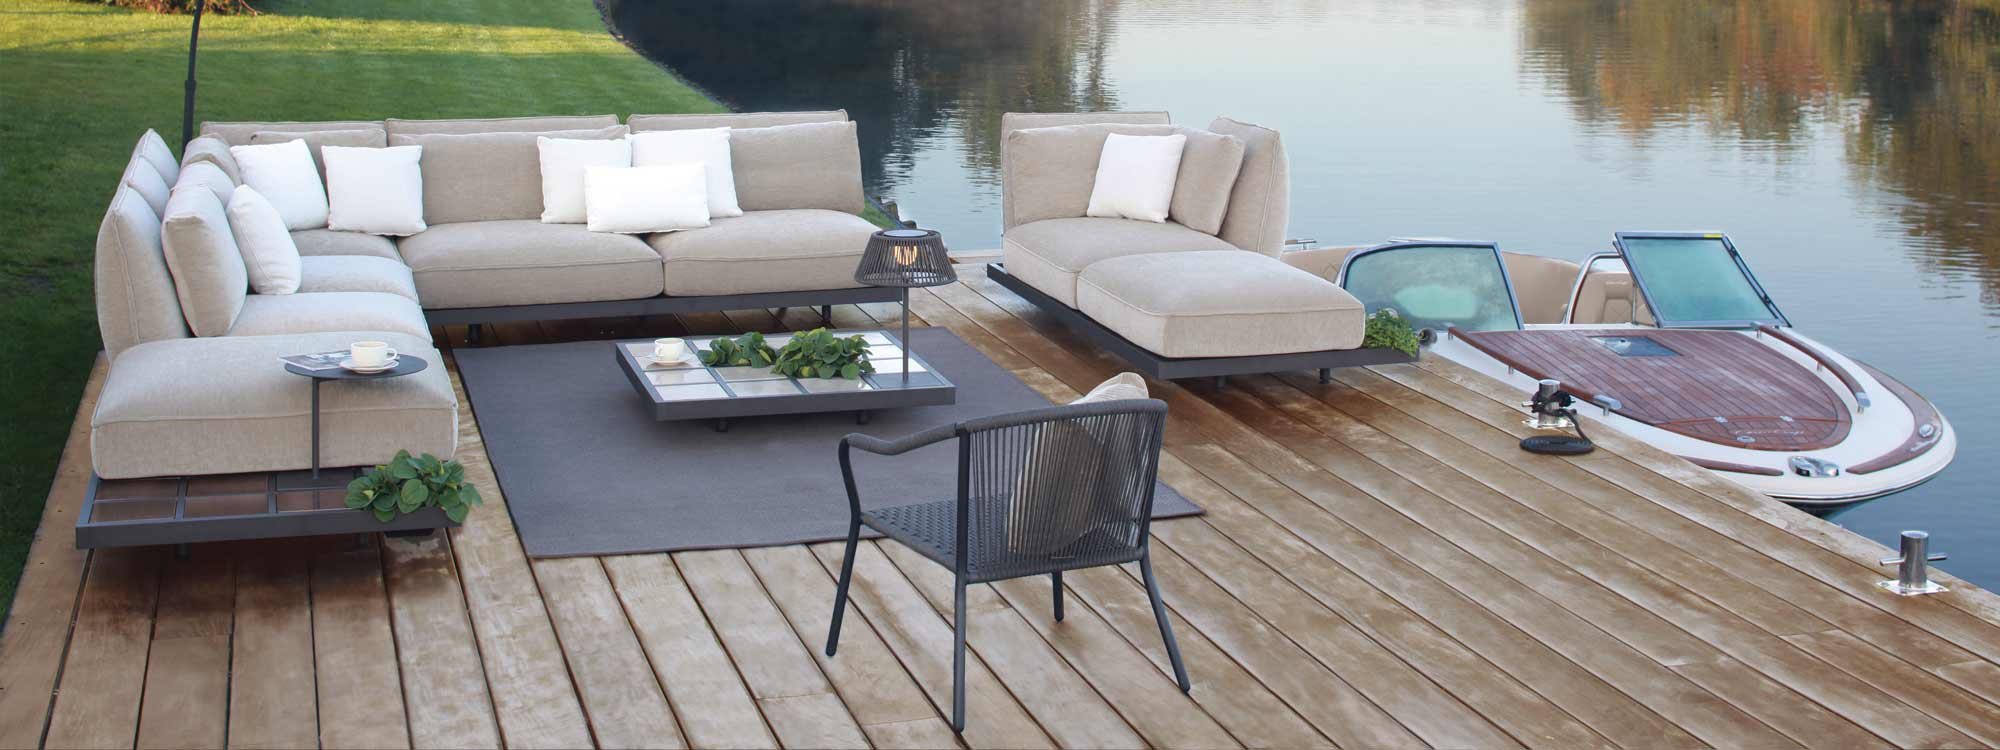 Image of lakeside installation of Royal Botania Mozaix Alu sofa with anthracite base and taupe cushions, with Riva speed boat moored alongside pontoon